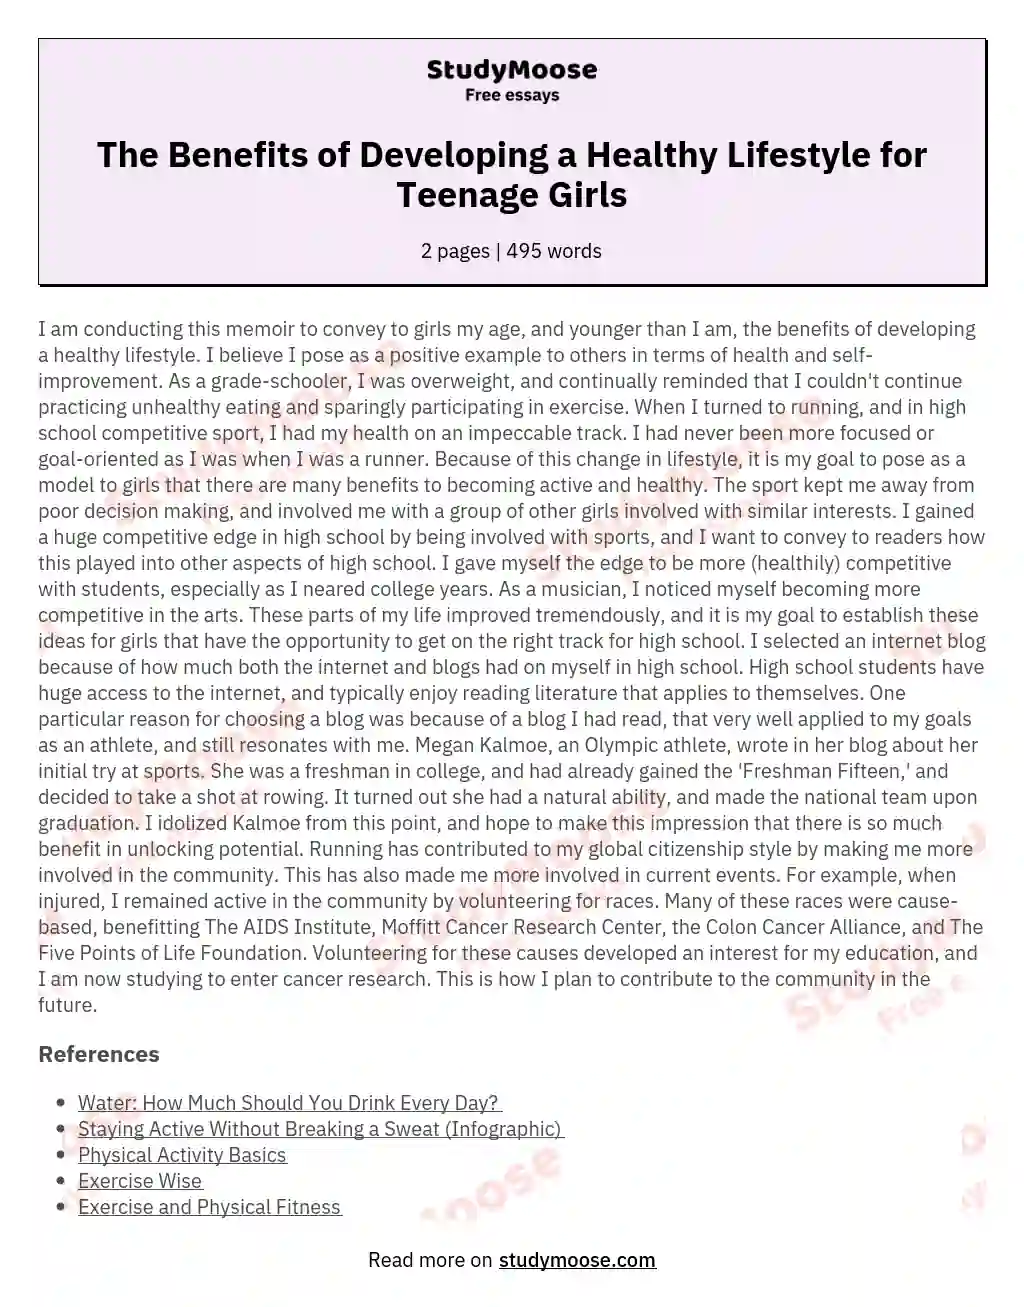 The Benefits of Developing a Healthy Lifestyle for Teenage Girls essay